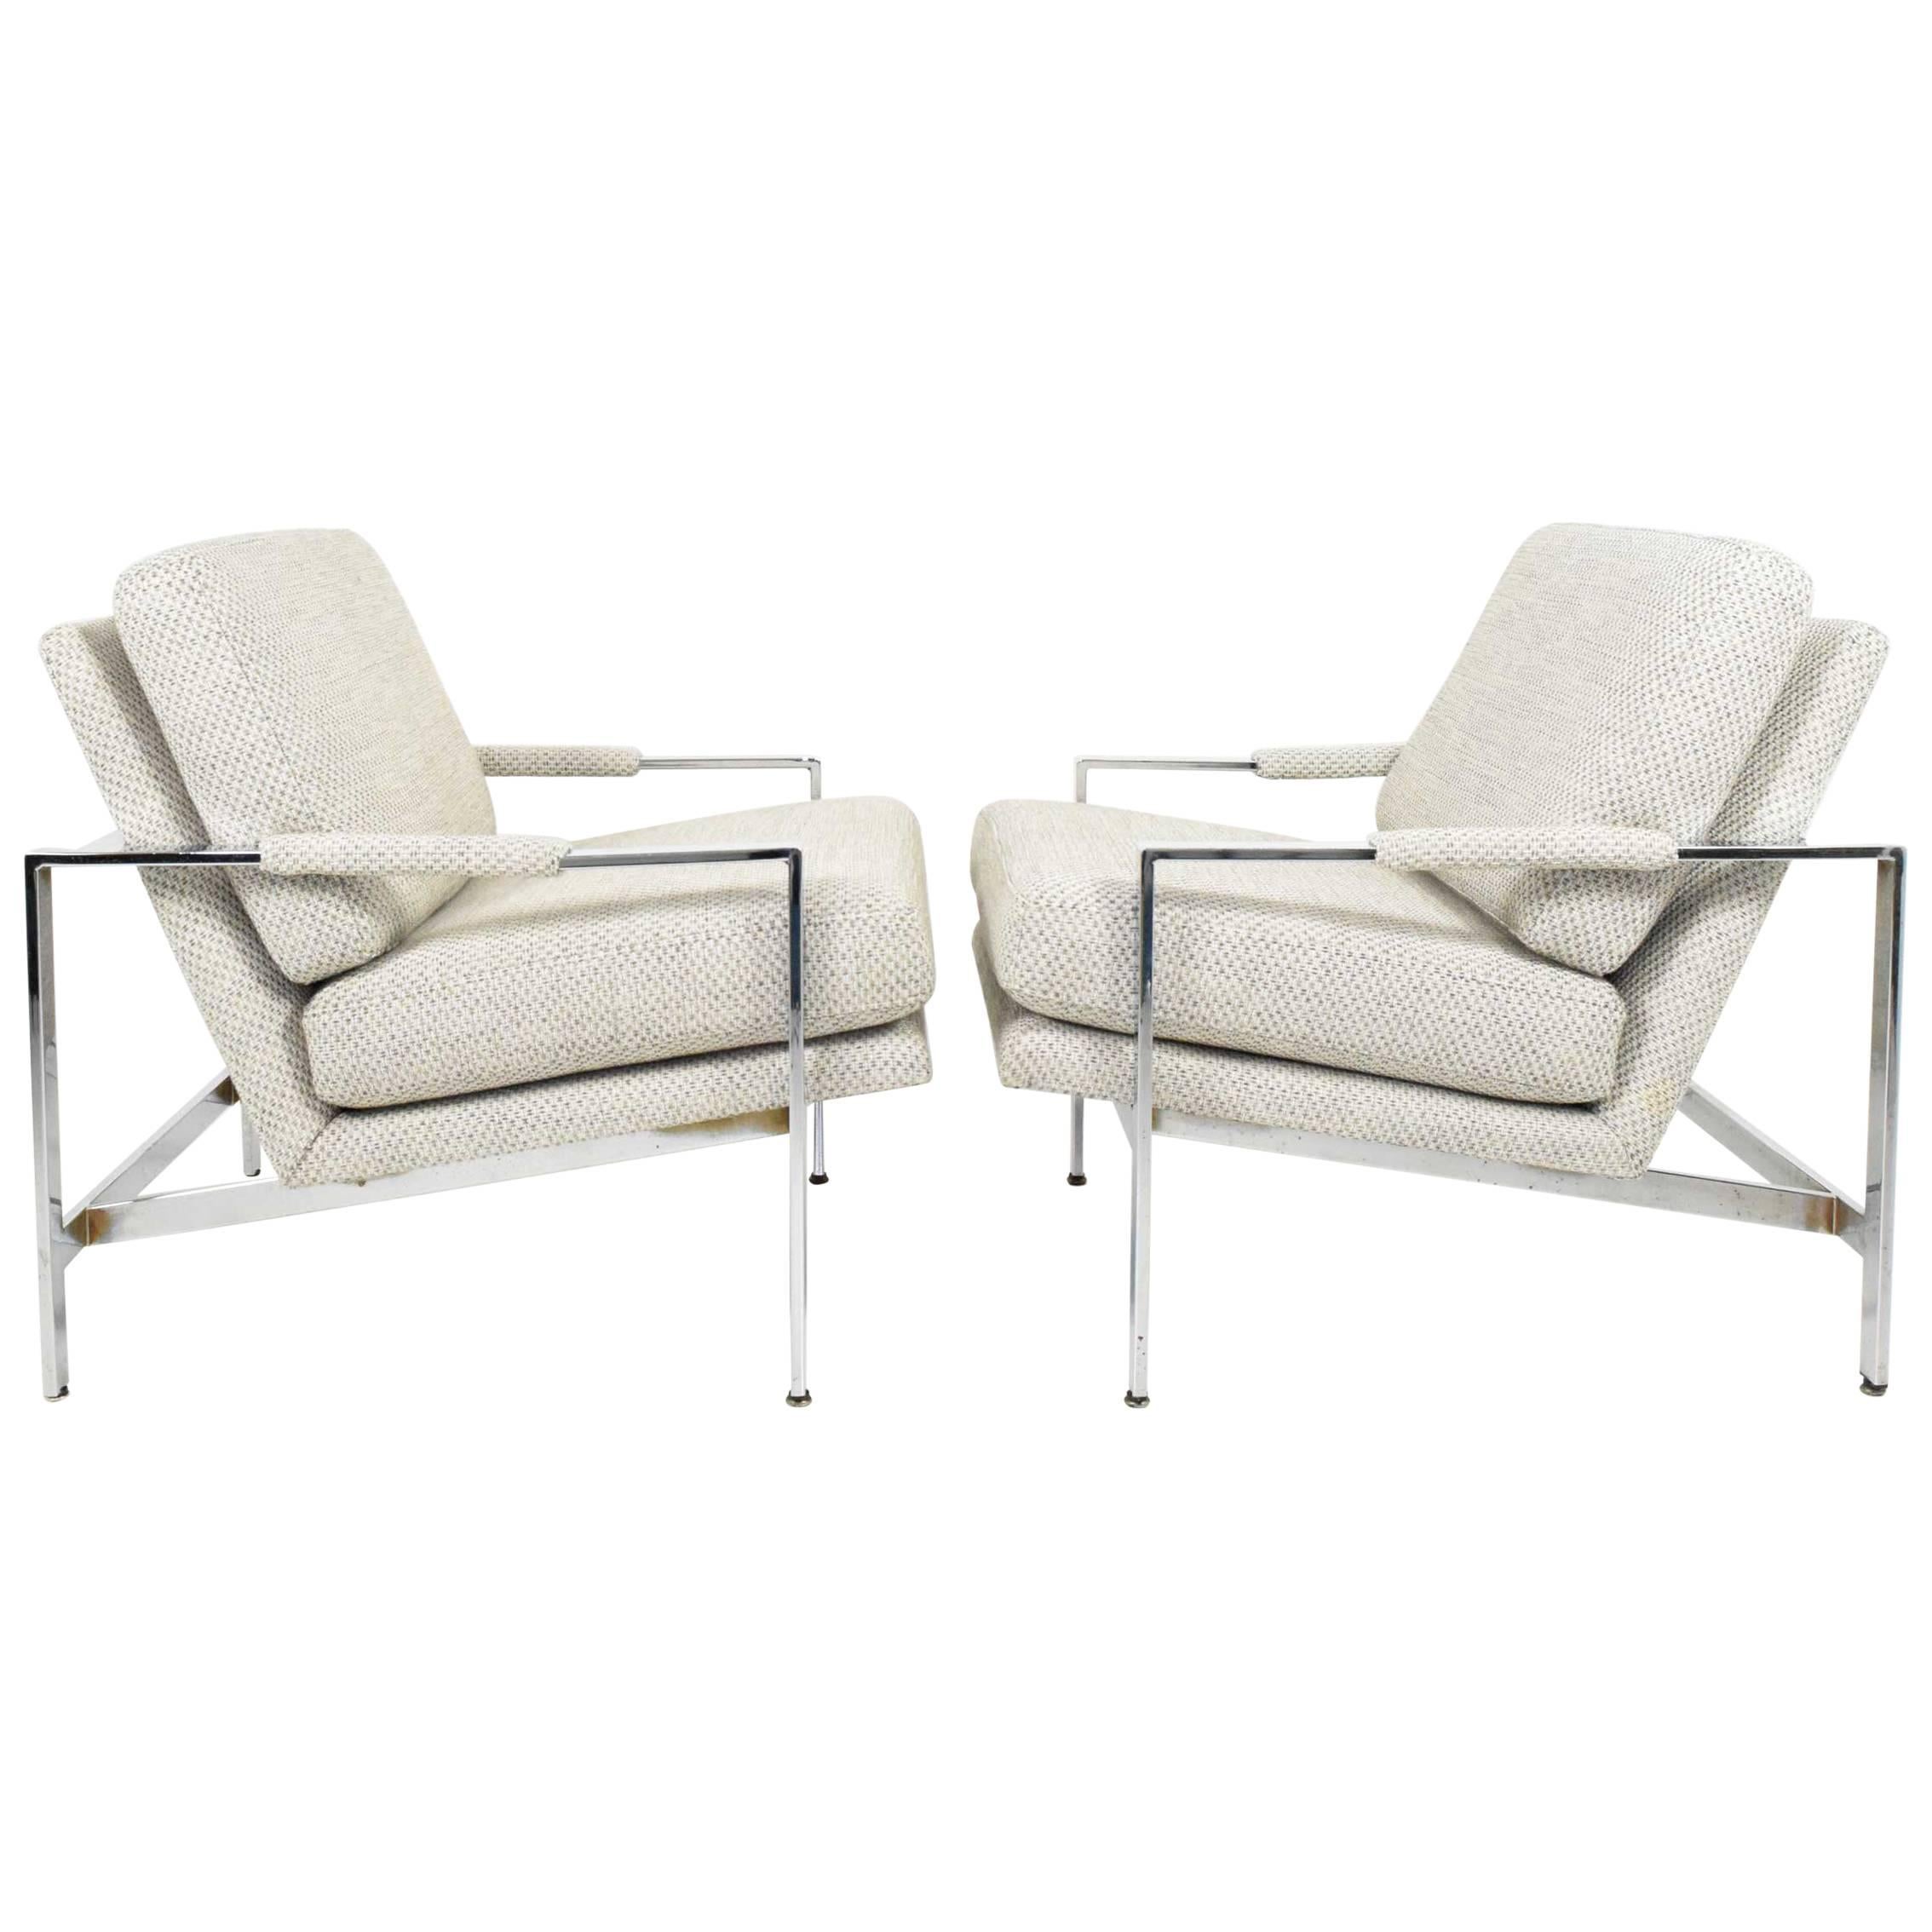 Milo Baughman Chrome Frame Lounge Chairs in Neutral Color New Upholstery